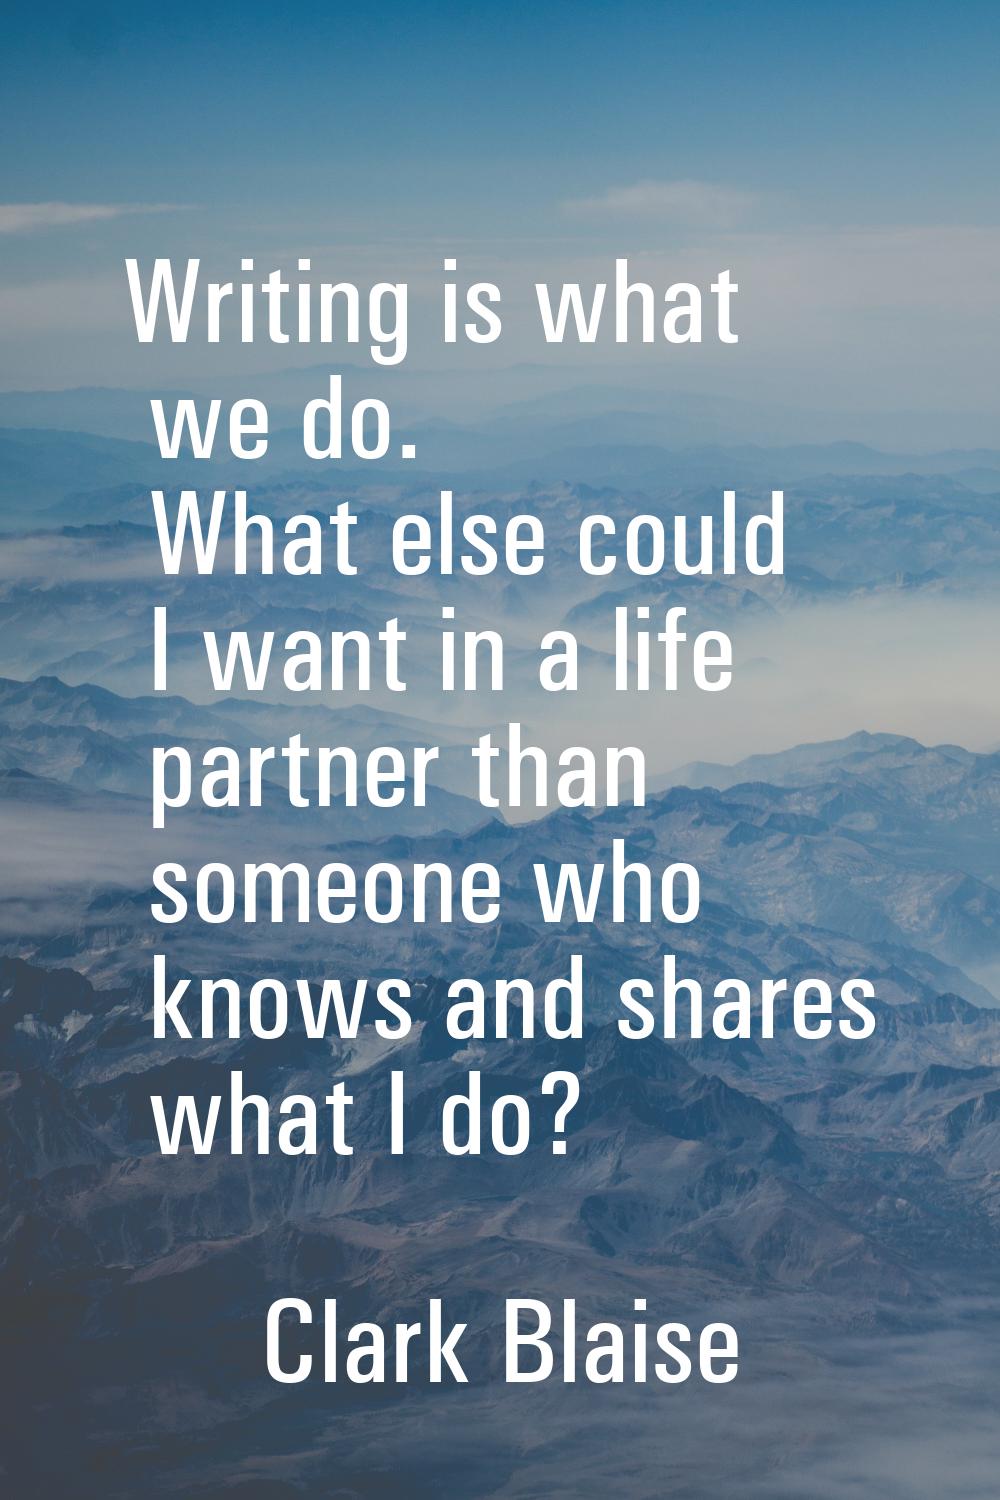 Writing is what we do. What else could I want in a life partner than someone who knows and shares w